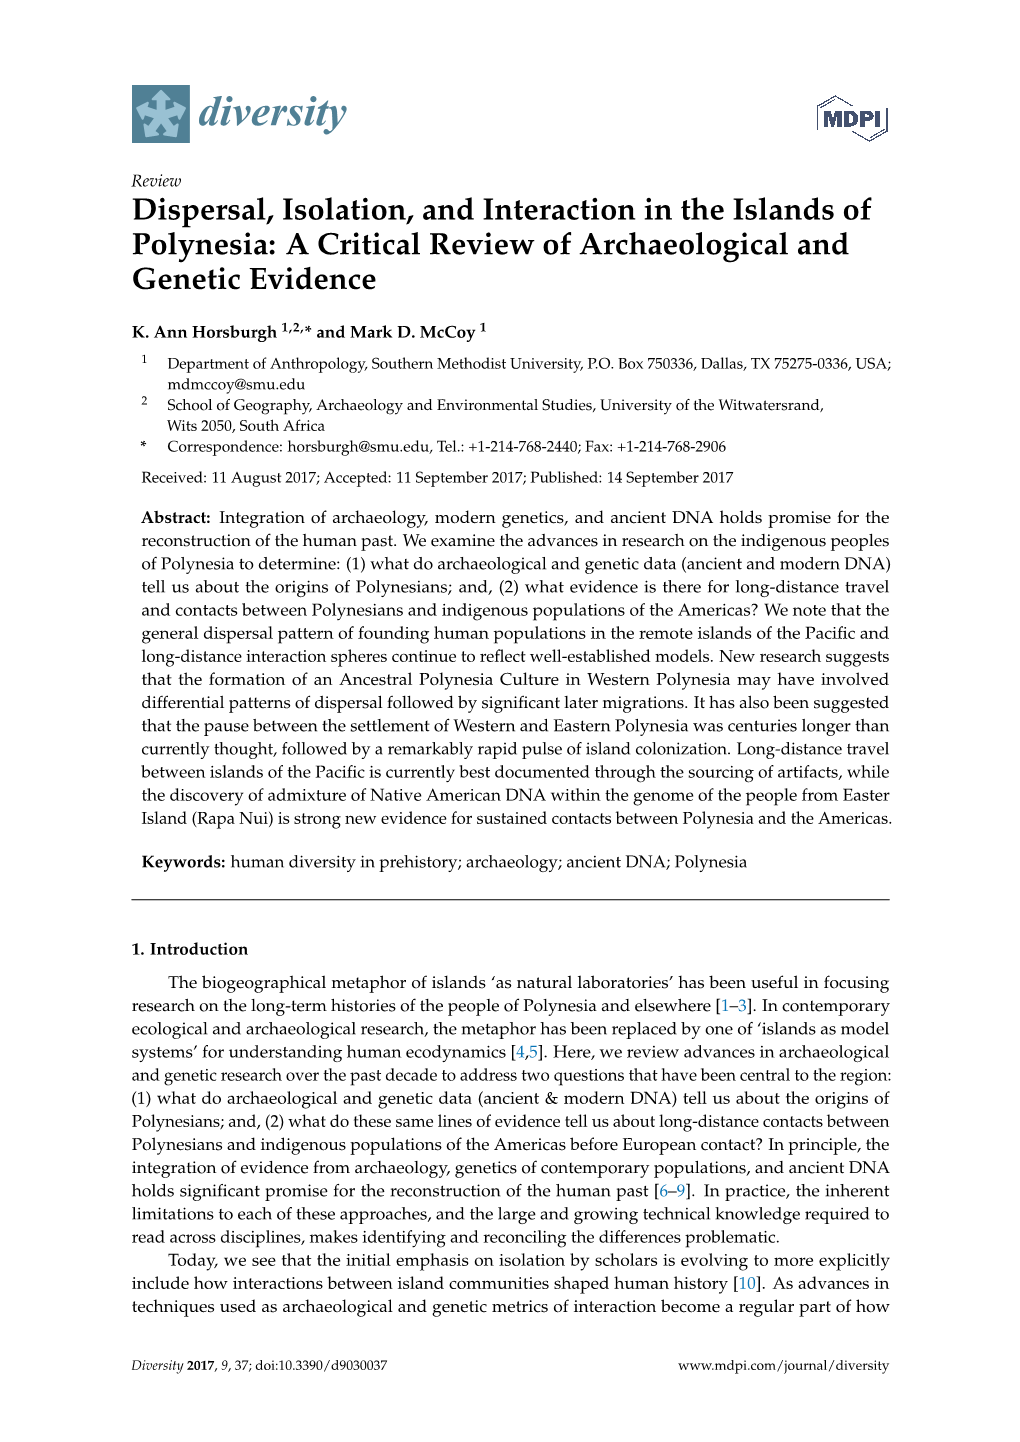 Dispersal, Isolation, and Interaction in the Islands of Polynesia: a Critical Review of Archaeological and Genetic Evidence